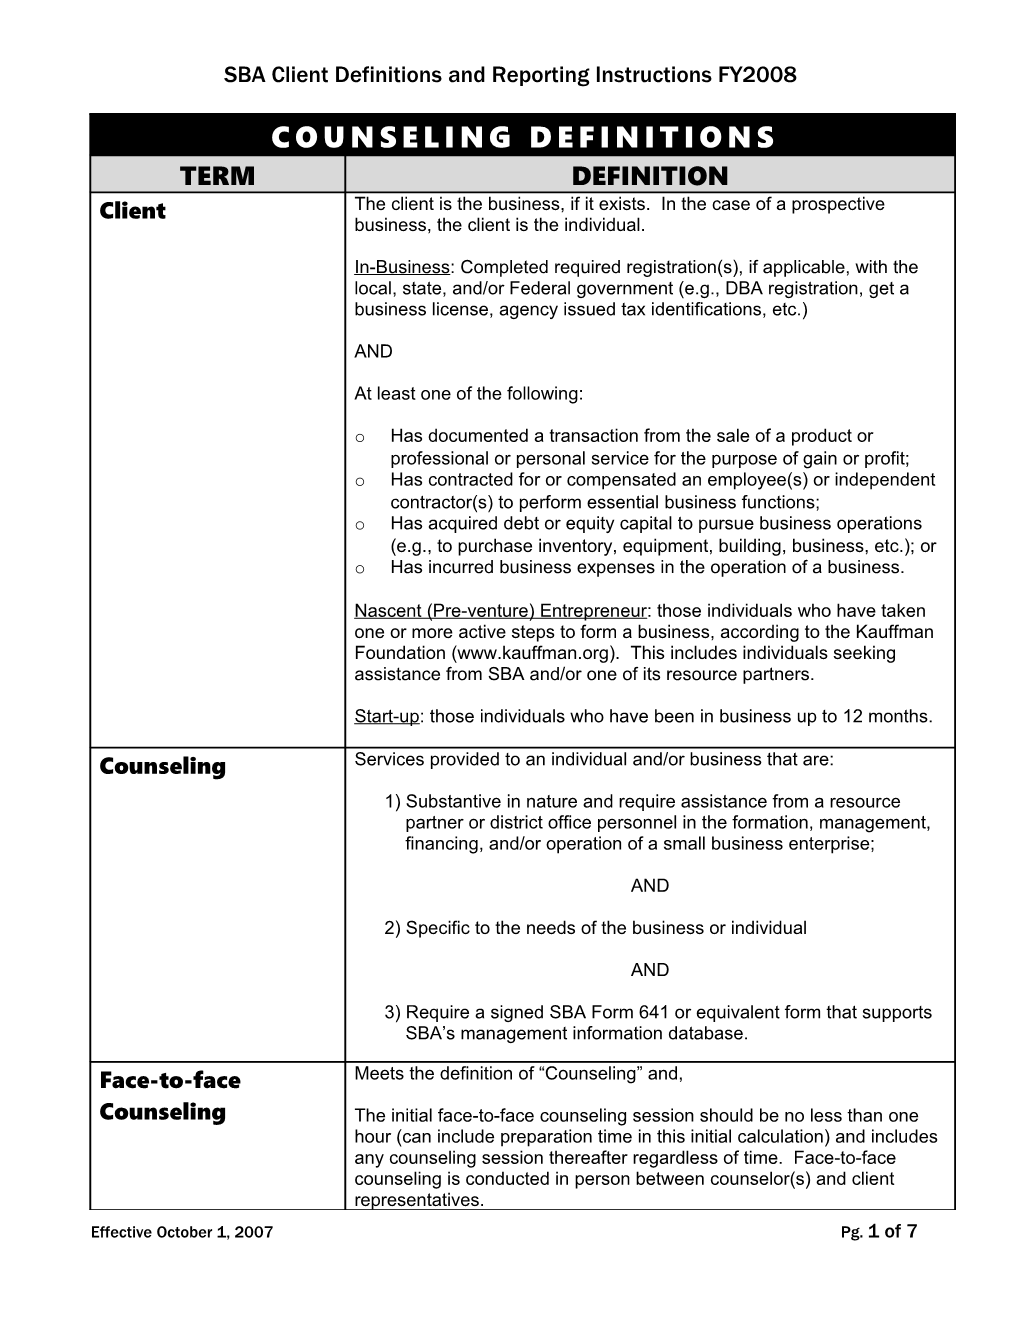 SBA Client Definitions and Reporting Instructions FY2008